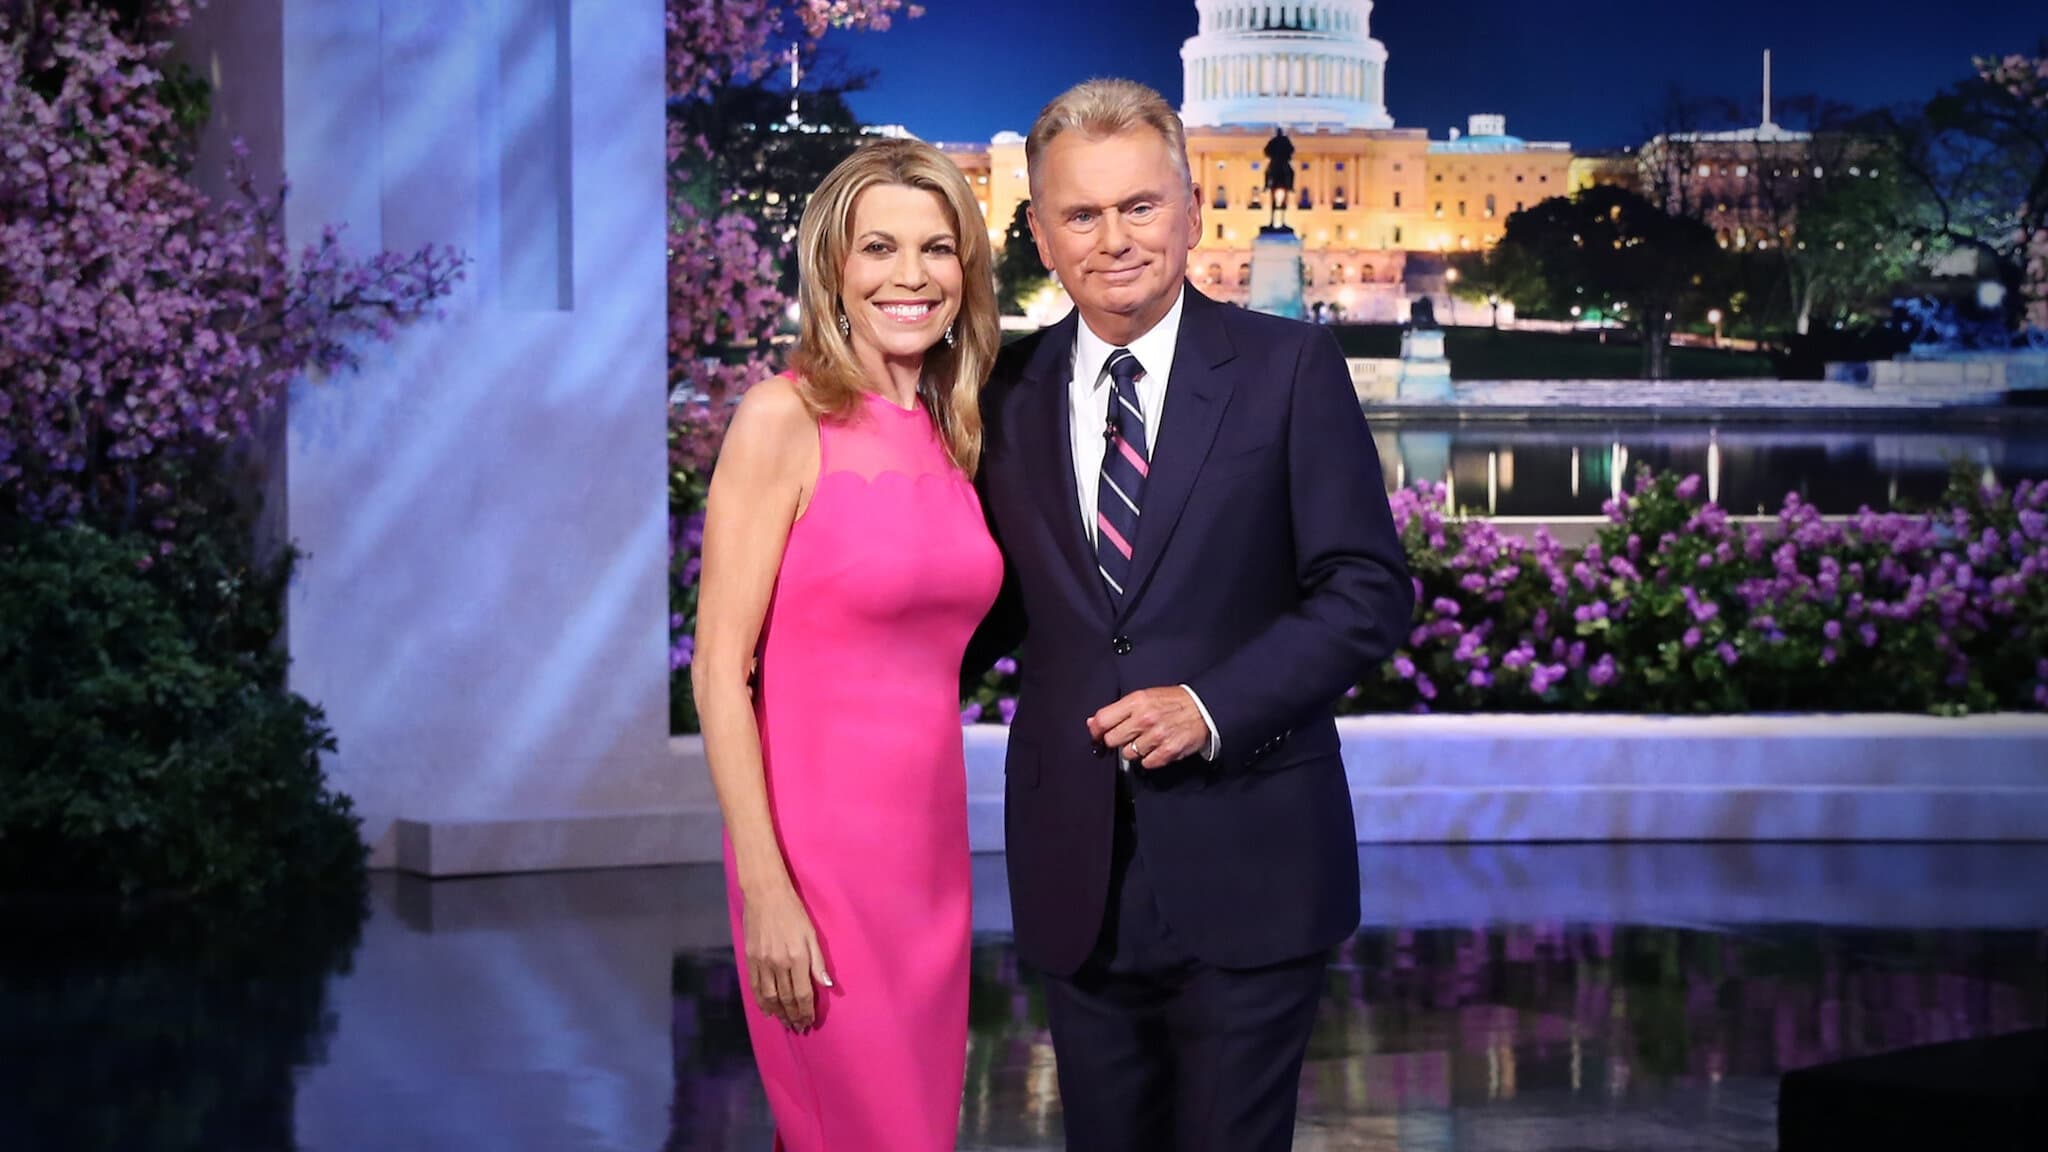 Wheel of Fortune - Season 33 Episode 9 : Home Sweet Home 4